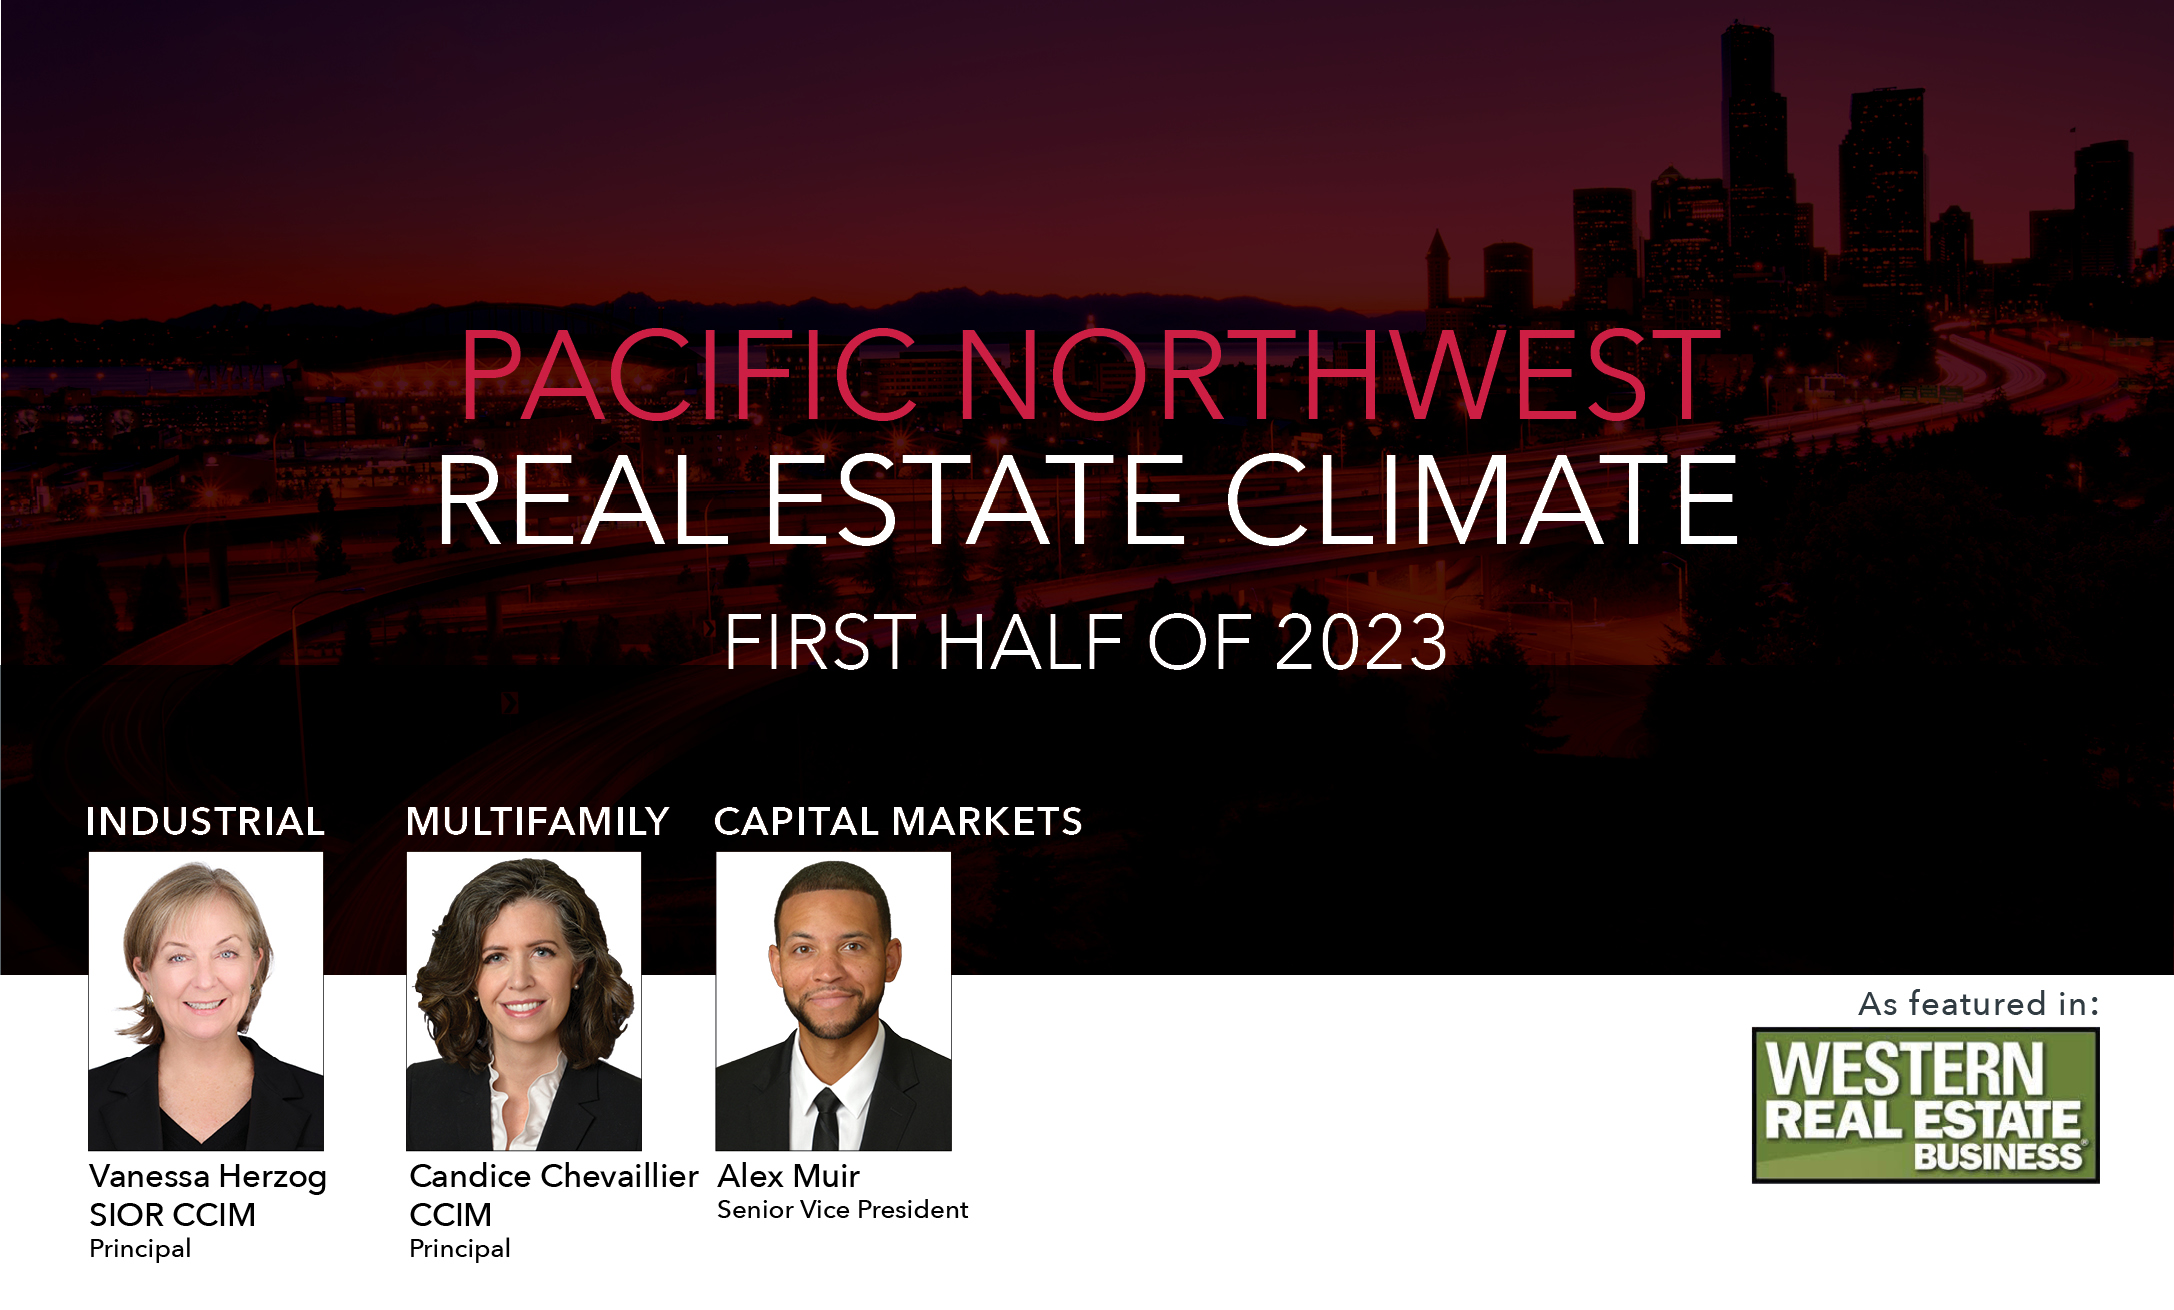 Pacific Northwest Real Estate Climate 2023